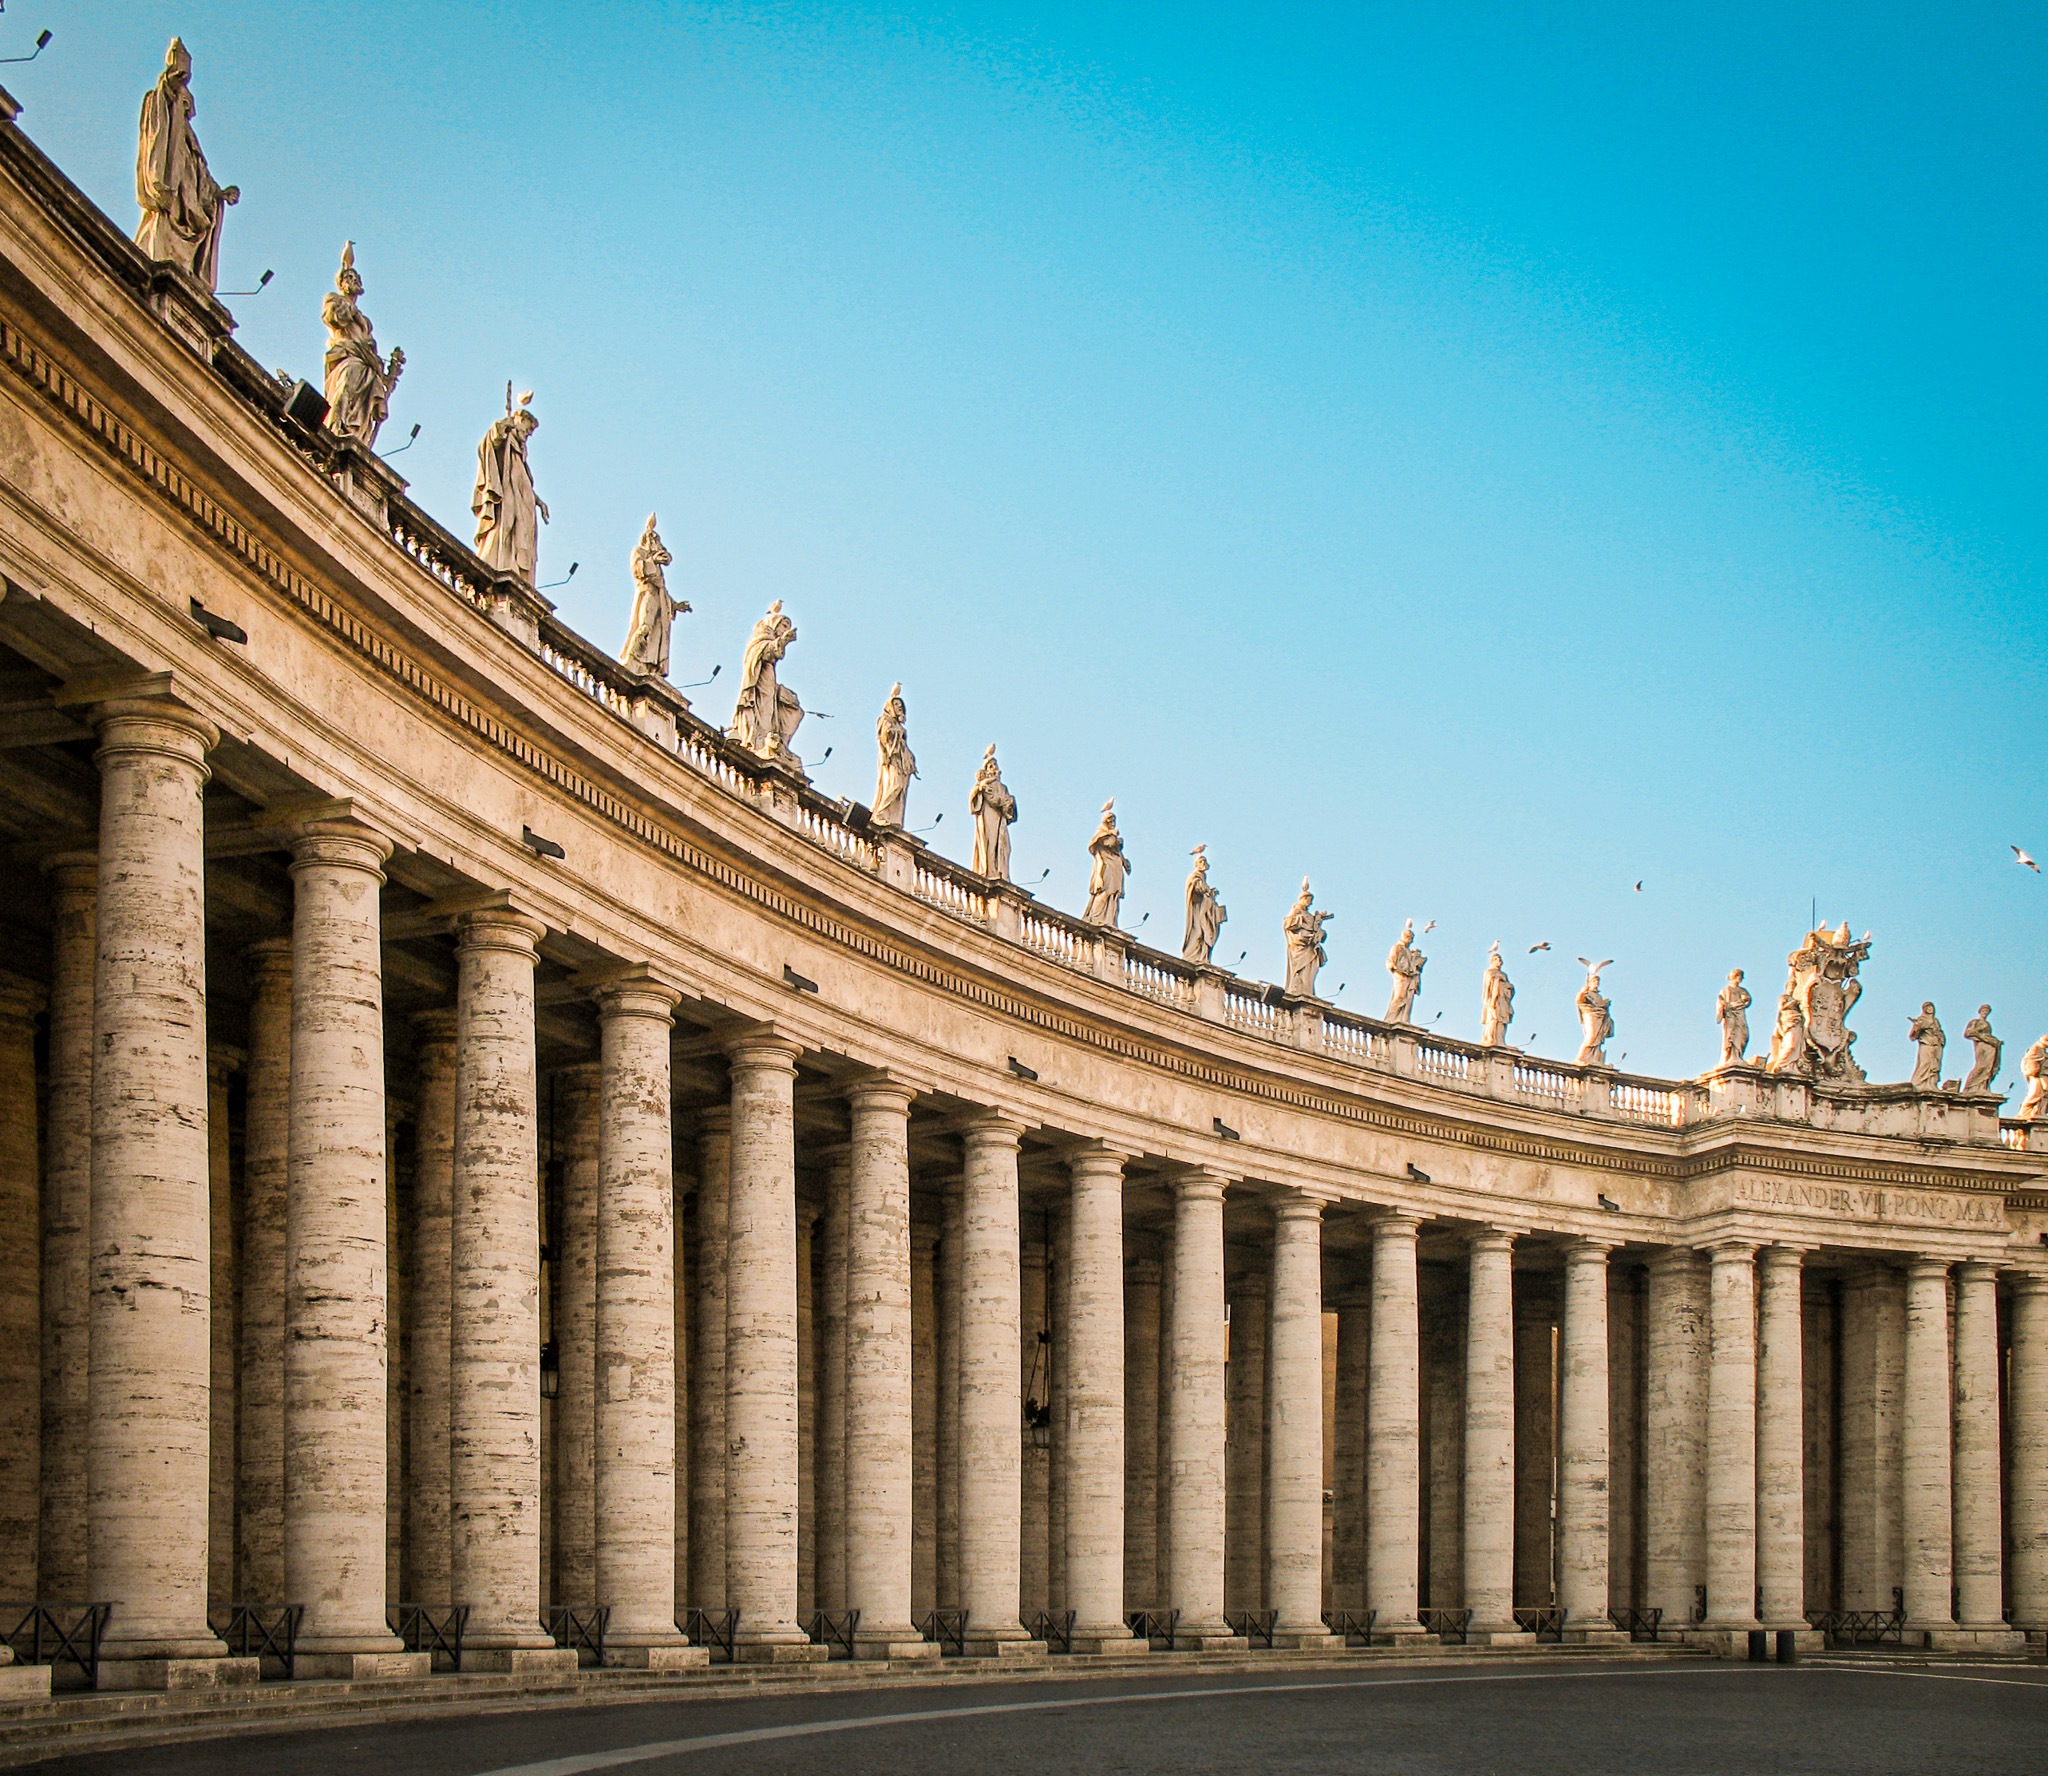 The colonnade of Saint Peter's Square in Vatican City